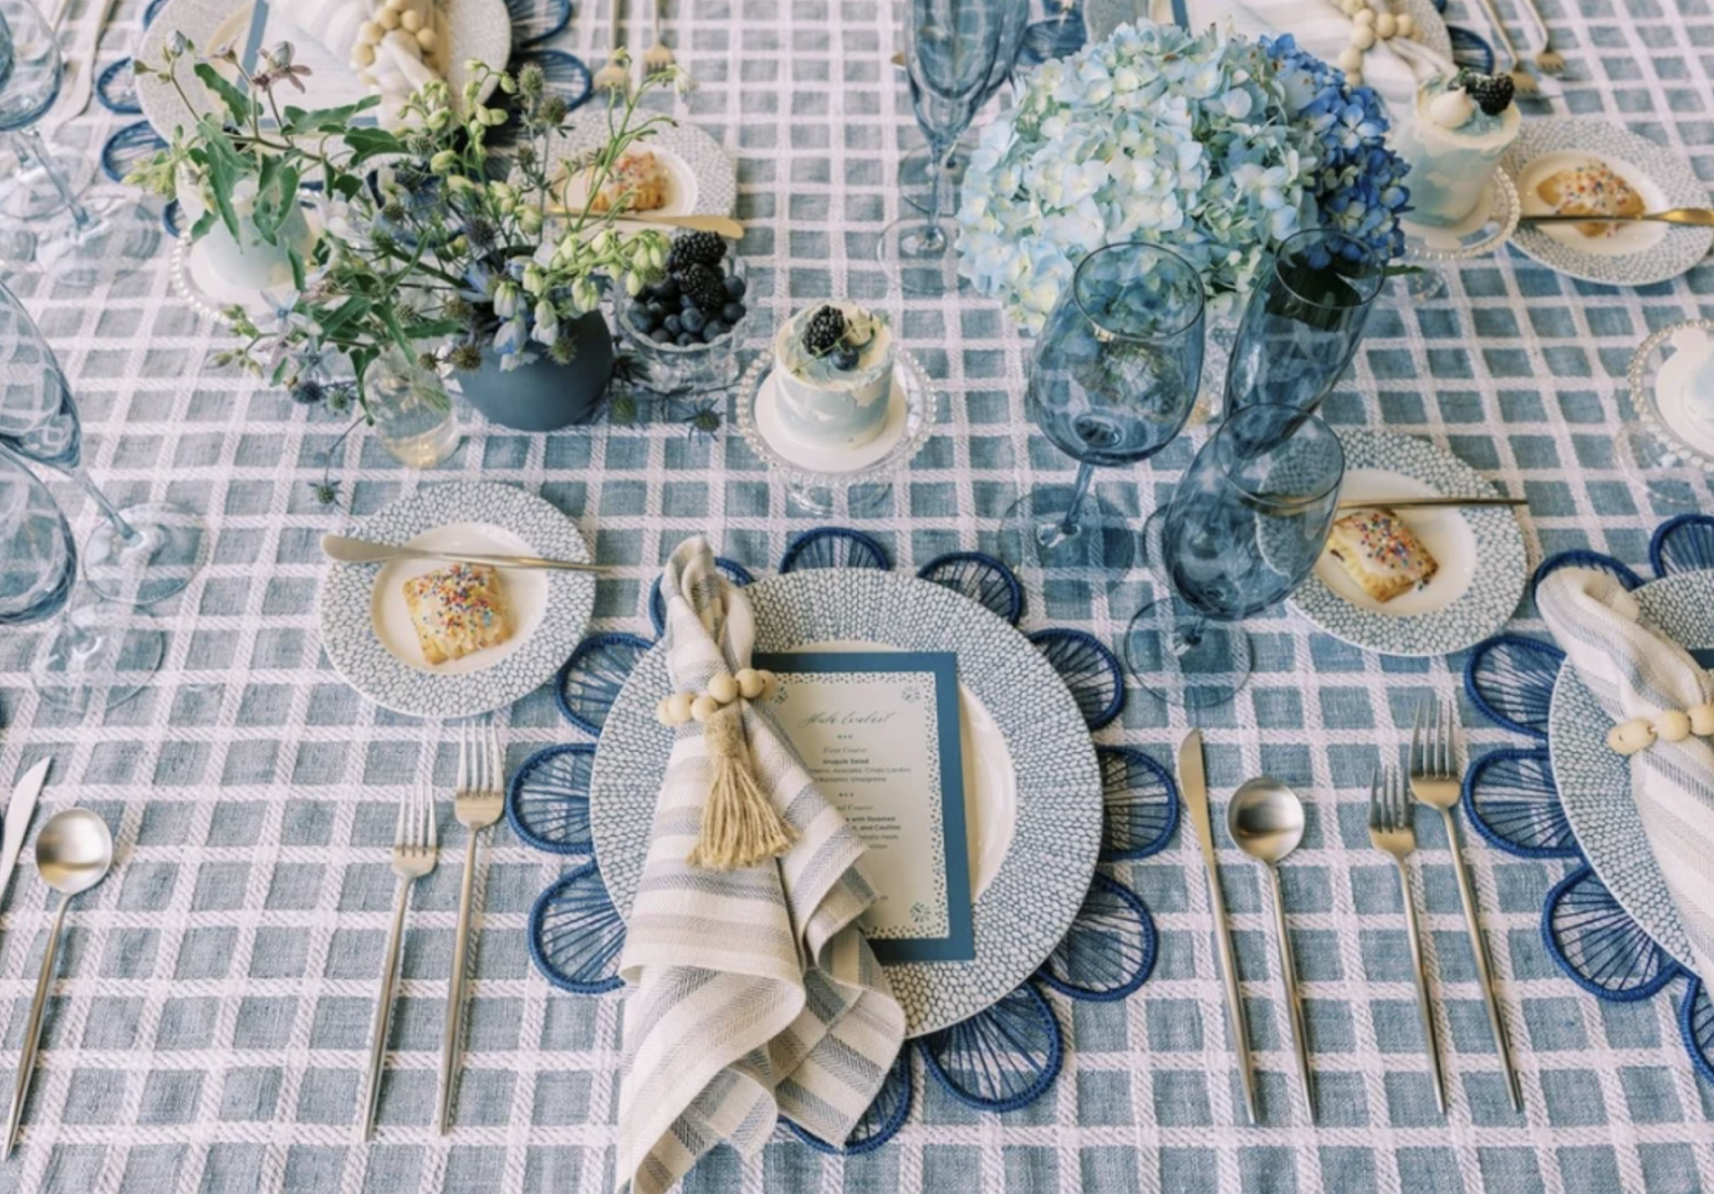 A neatly set table with a blue and white checkered tablecloth, featuring plates, cutlery, glasses, a menu, cloth napkins, and centerpieces of flowers and greenery inspired by summer wedding color trends.